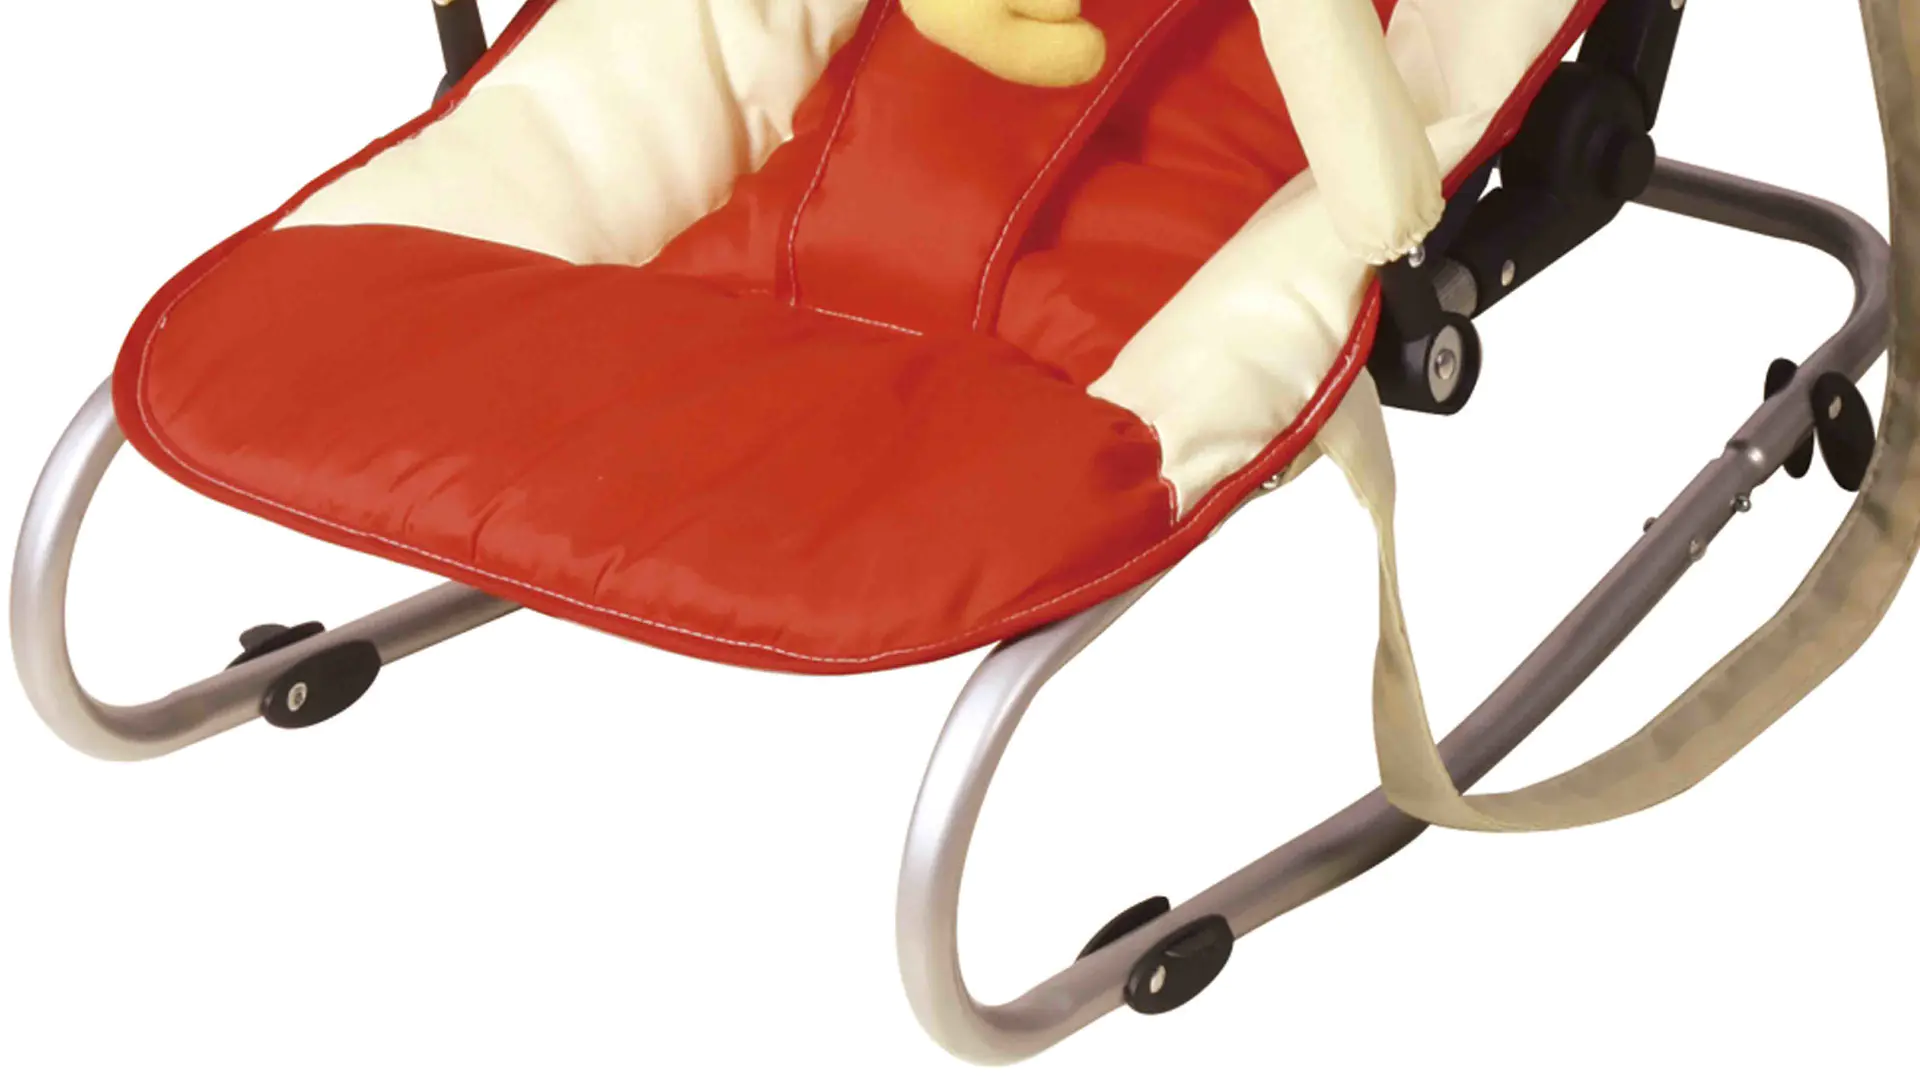 Aoqi foldable baby bouncer price factory price for toddler